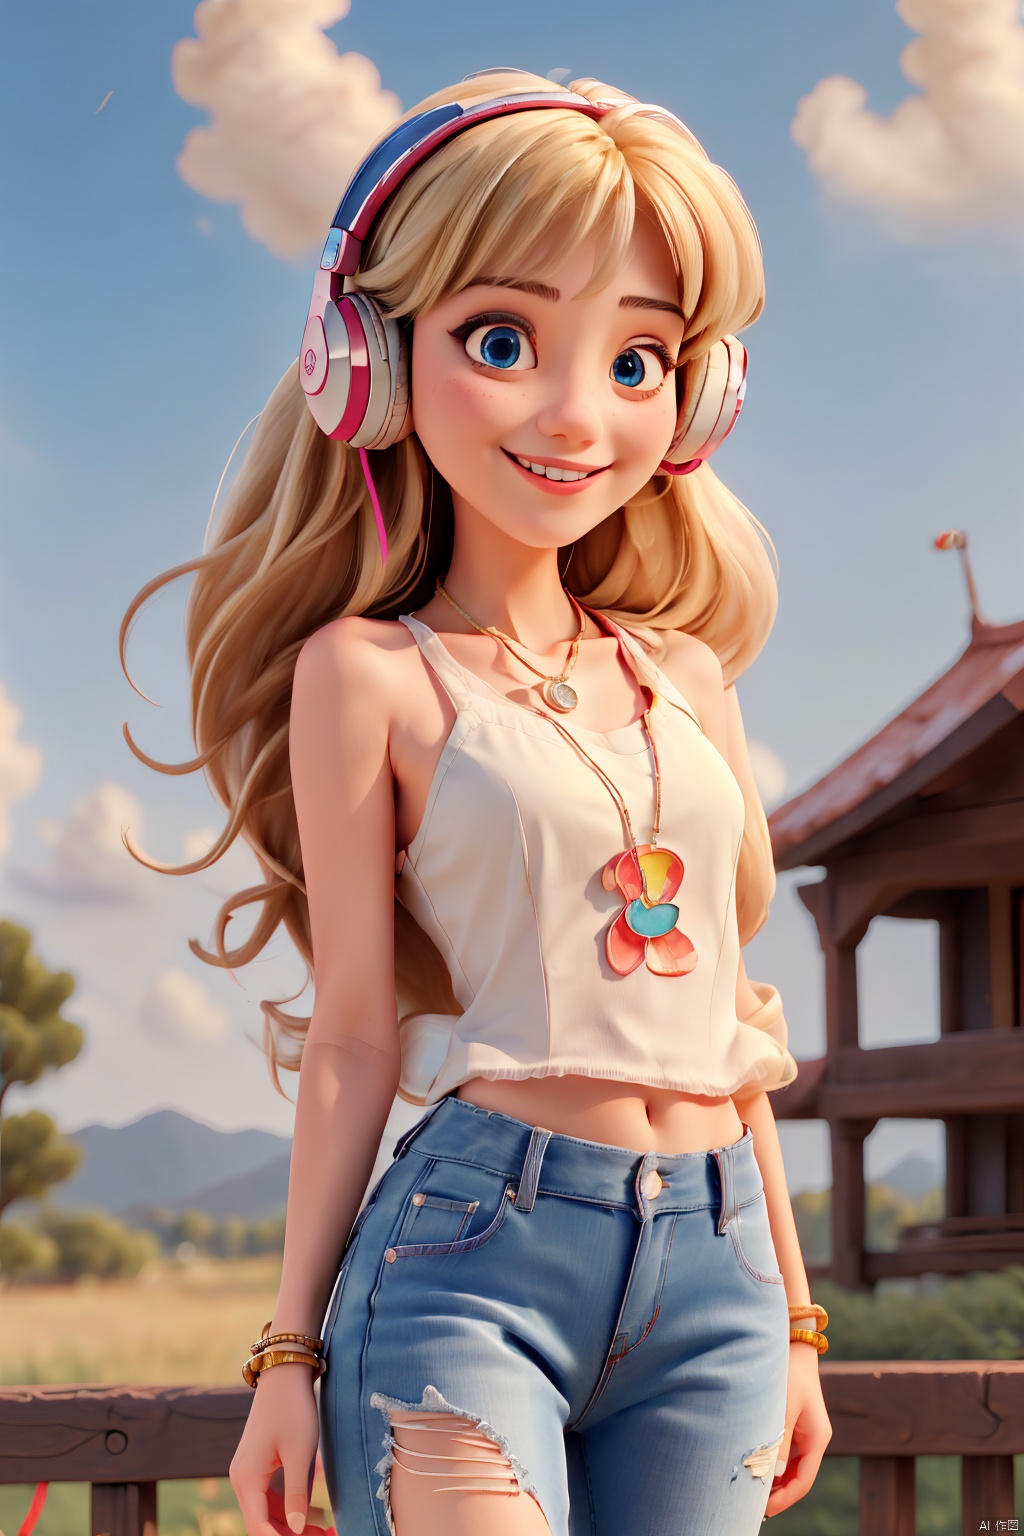  (best quality),((masterpiece)),(highres),illustration,original,extremely detailed,hkgirl,1girl,solo,smile,happy smile,long_hair,looking_at_viewer,bangs,blue_eyes,blonde_hair,bare_shoulders,jewelry,closed_mouth,collarbone,White top,Jeans,outdoors,sky,sleeveless,necklace,bracelet,lips,parted_bangs,sash,covered_navel,headphones,